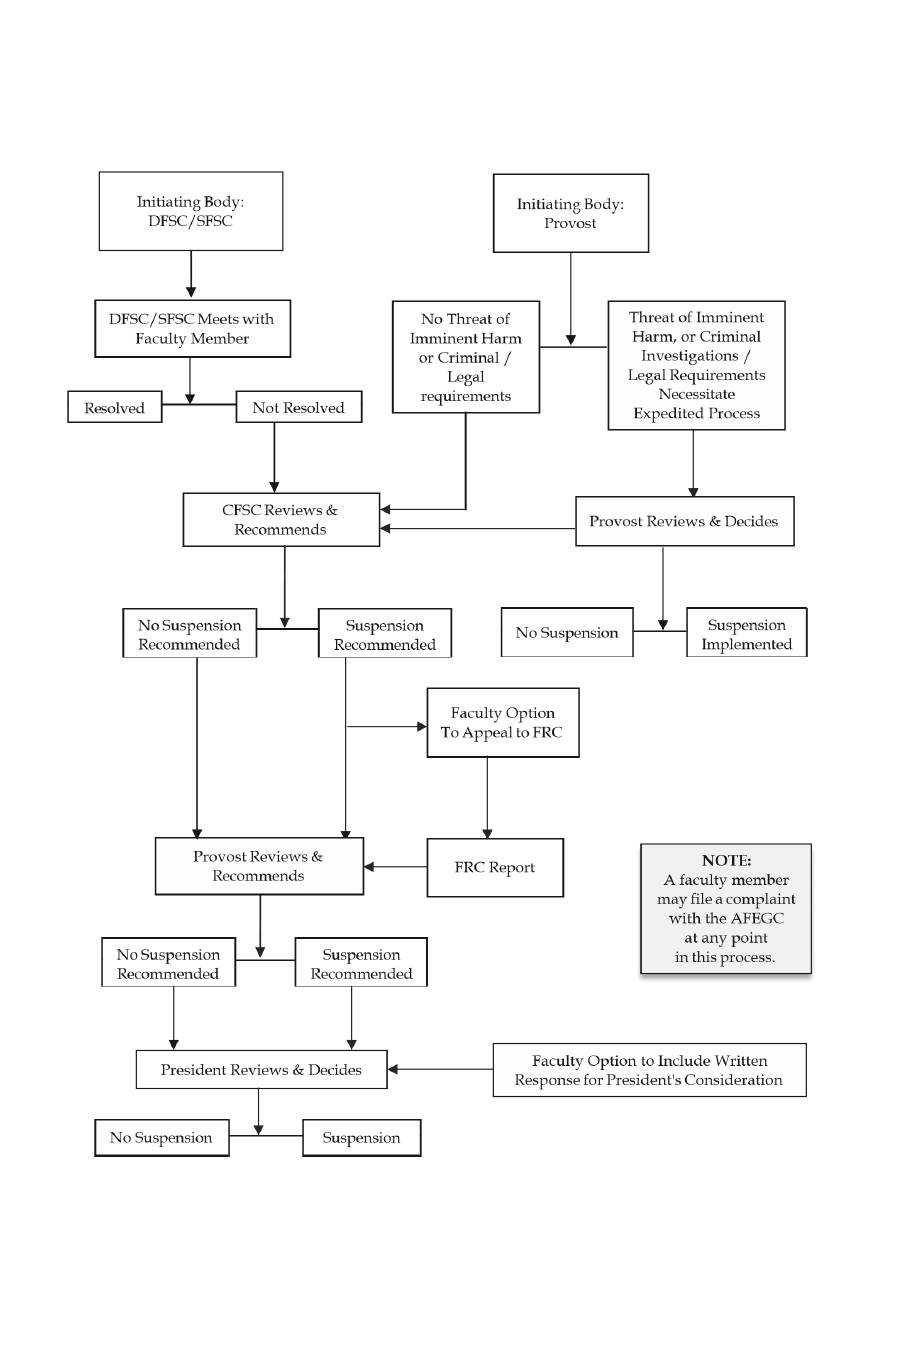 Overview of the Suspension Process Flowchart